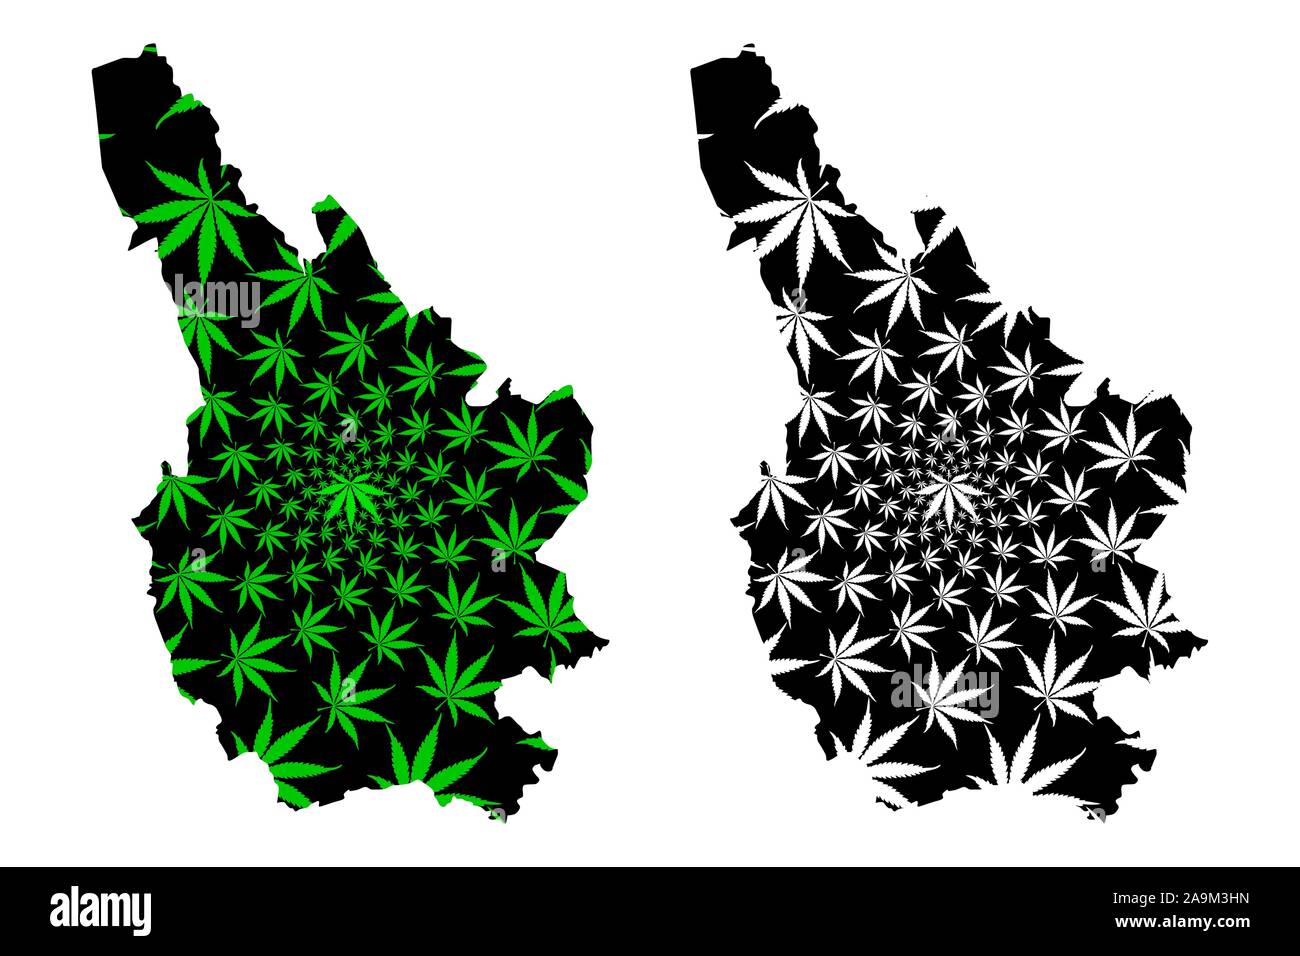 Caerphilly (United Kingdom, Wales, Cymru, Principal areas of Wales) map is designed cannabis leaf green and black, Caerphilly County Borough map made Stock Vector